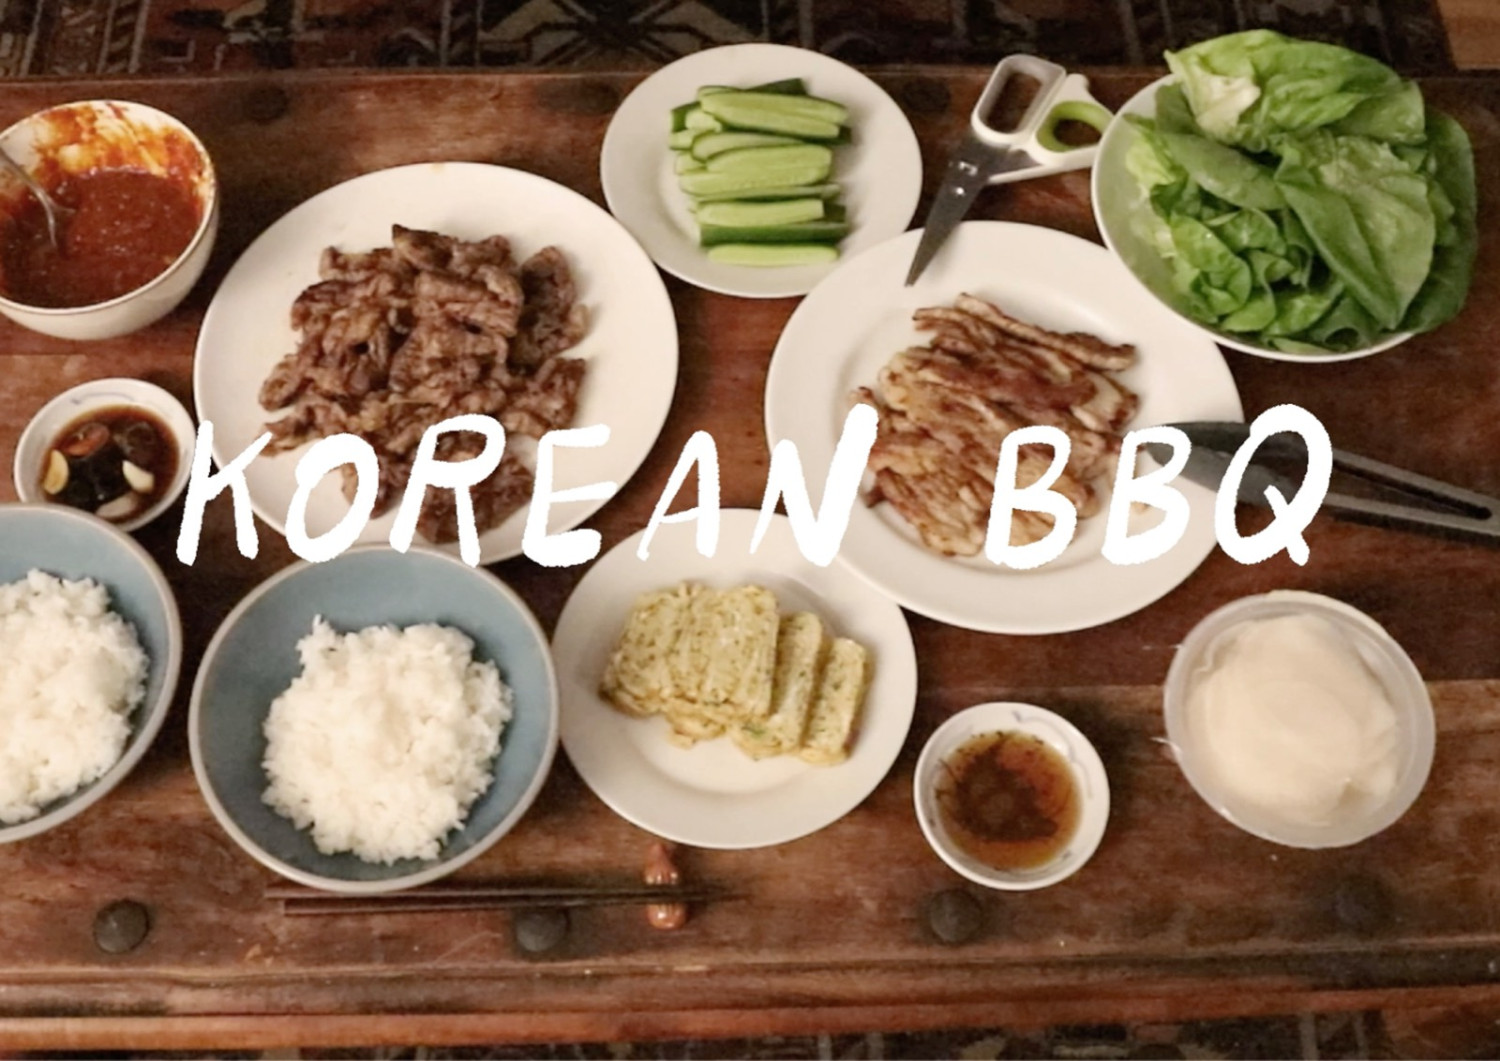 The hosts offered up their kitchens for an evening as I prepared them Korean meals. The reversal of host and guest roles created an unconventional dynamic that allowed us to lean into vulnerability